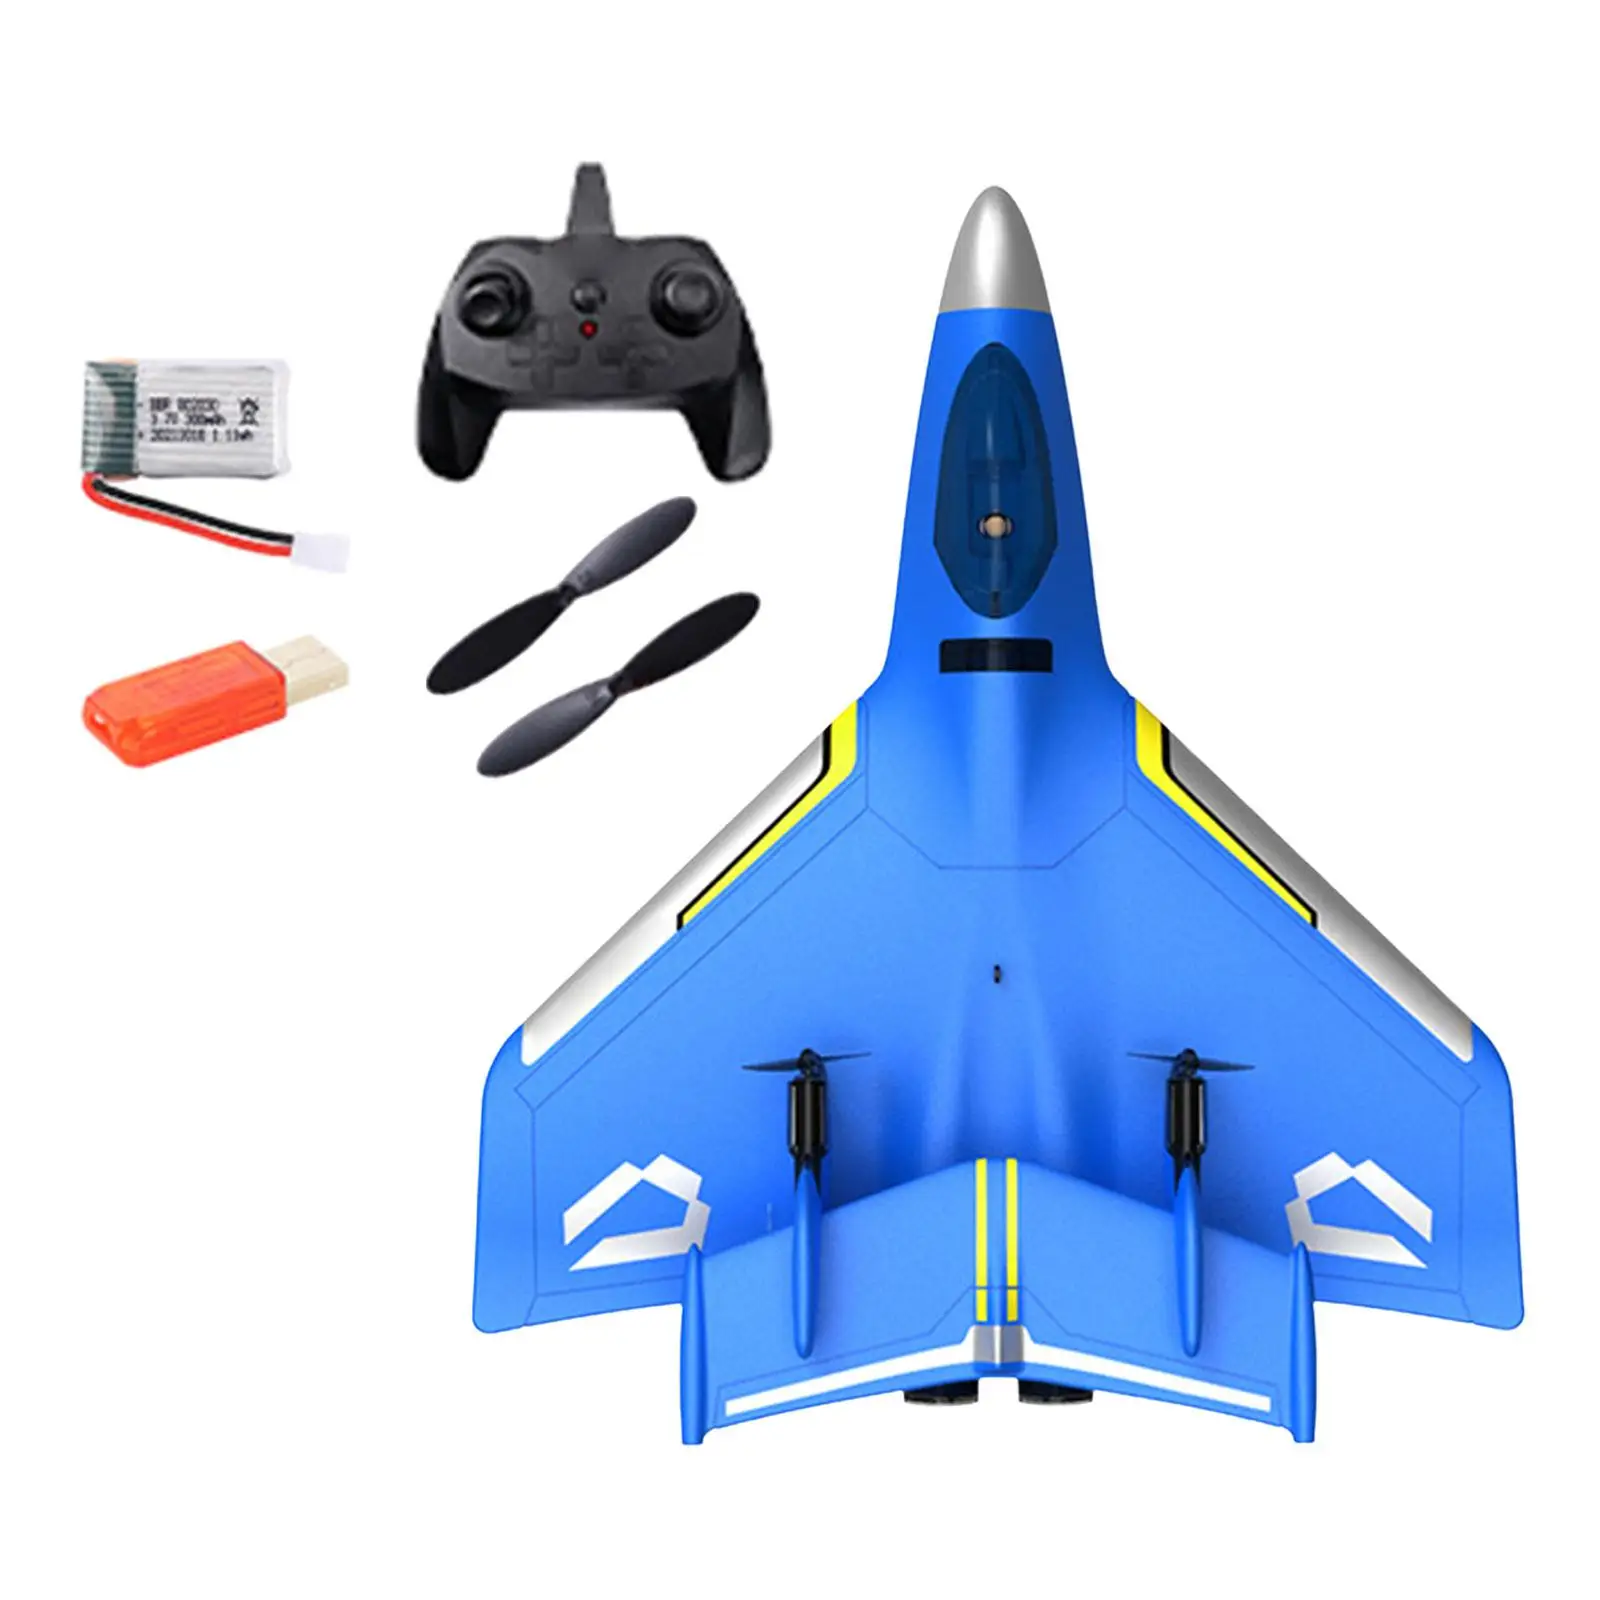 RC Plane Portable Outdoor Flighting Toys Easy to Control 2.4GHz Stable RC Aircraft Jet Hobby RC Glider for Beginner Boys Girls